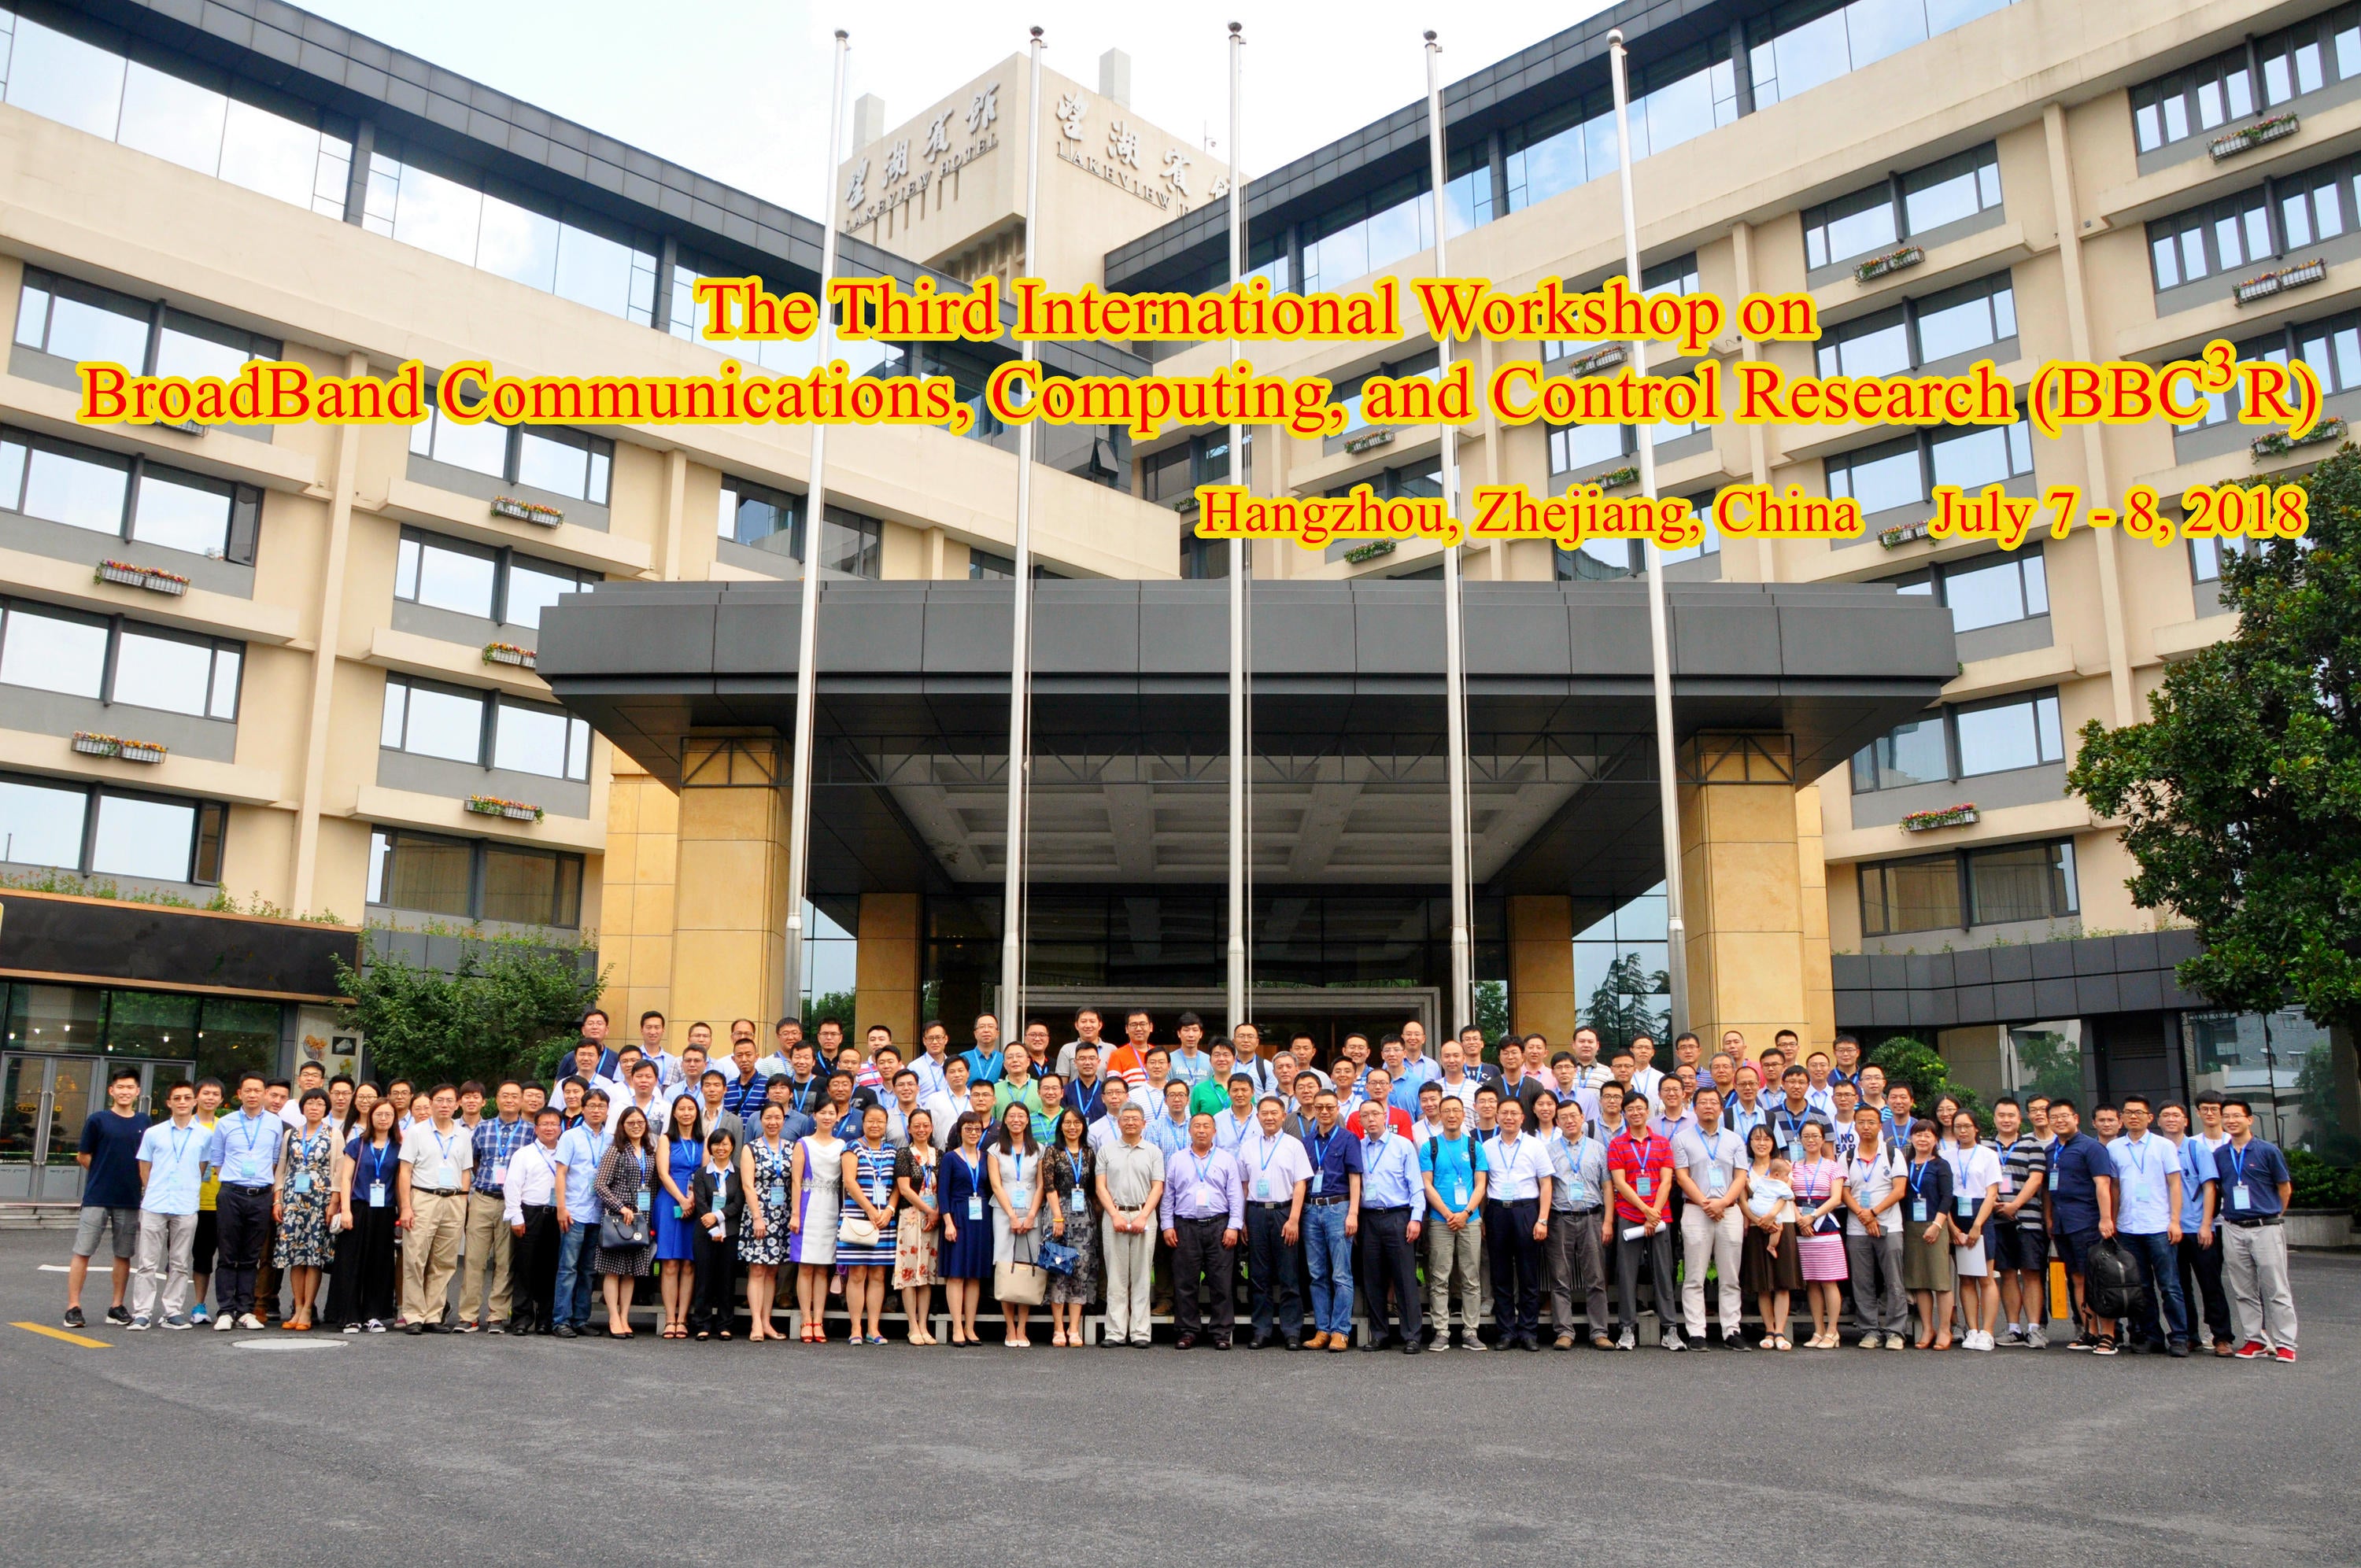 Prof. Shen and many BBCR members attended the 3rd International Workshop on BroadBand Communications, Computing, and Control Research (BBC3R)